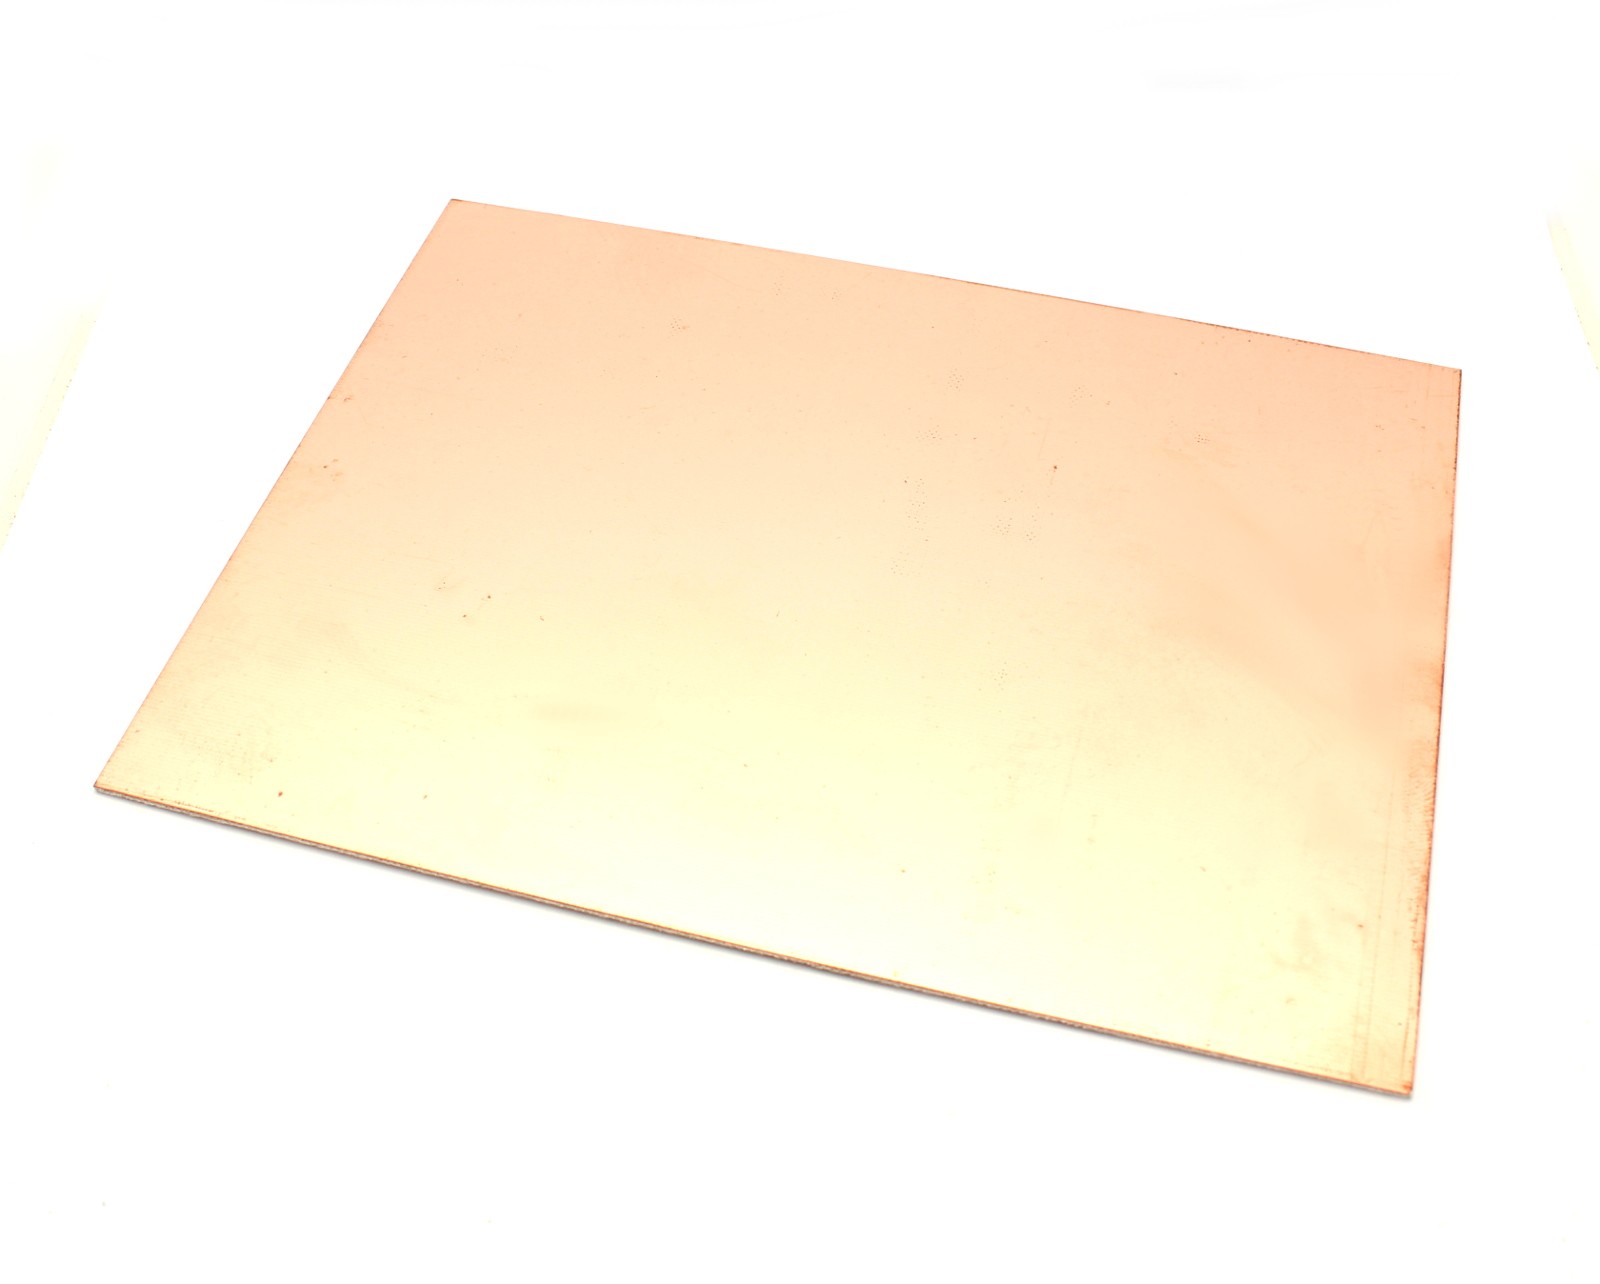 Double Sided Copper Clad Laminate PCB Circuit Board 8x10 2 pcs 